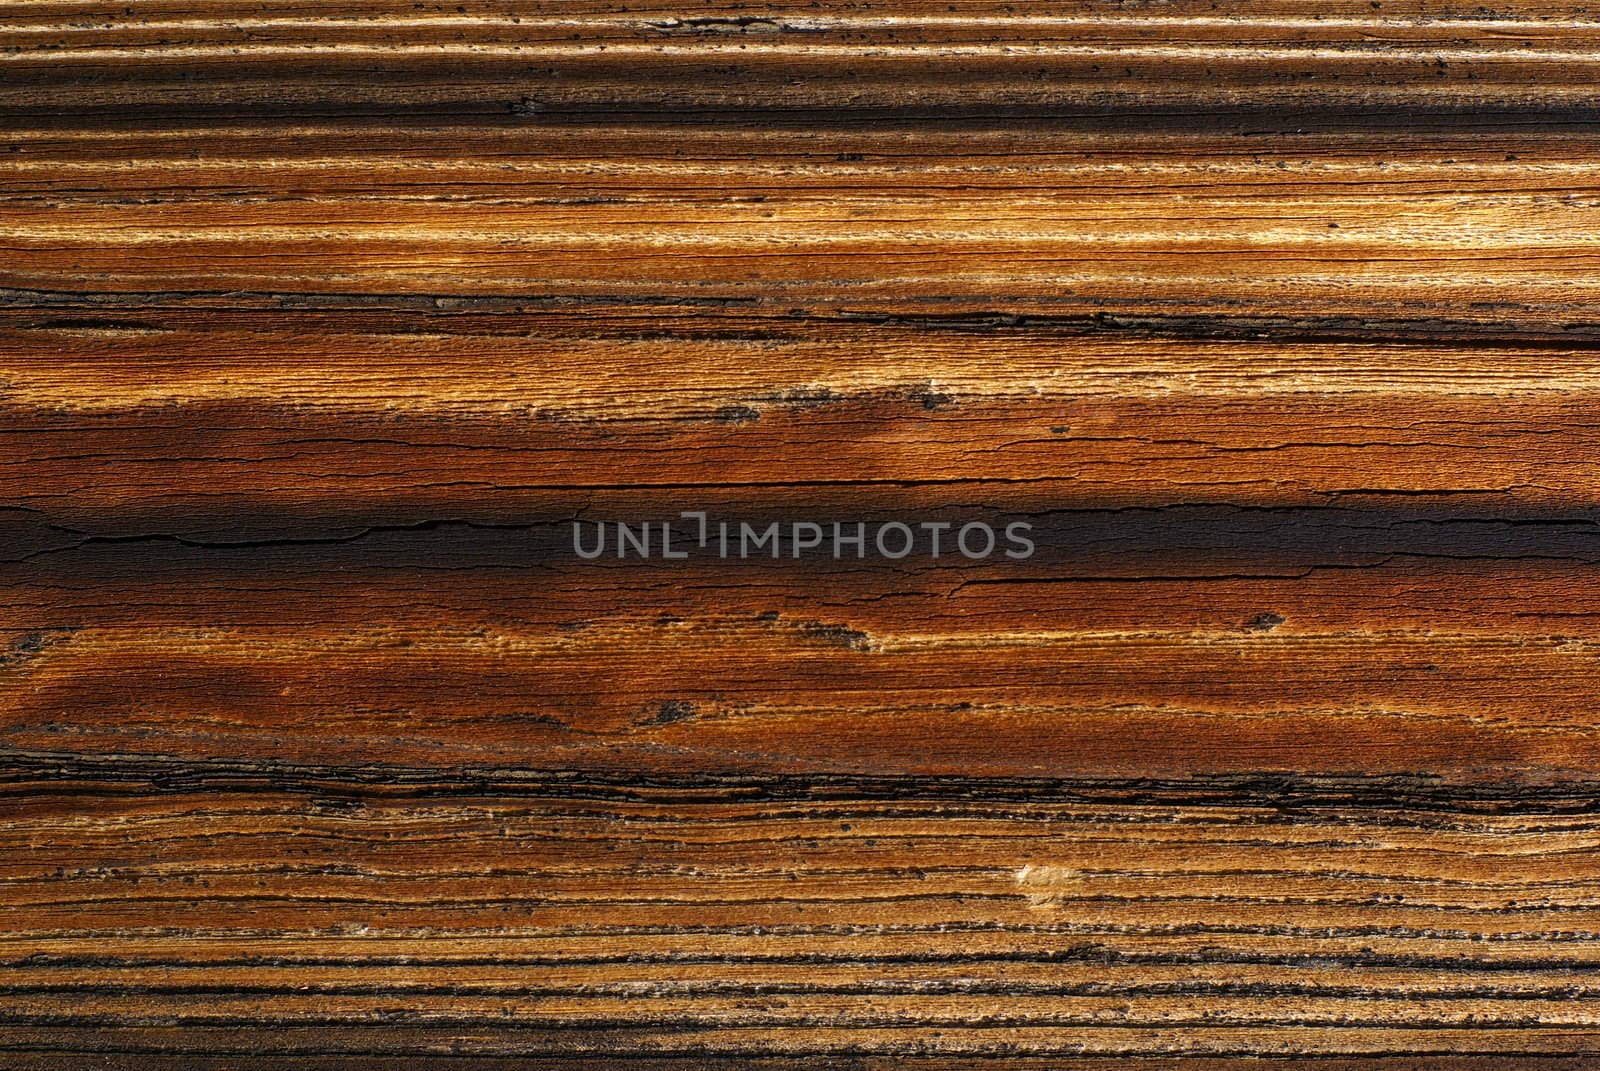 Wood detail - old rough, board background with clear wood grain.